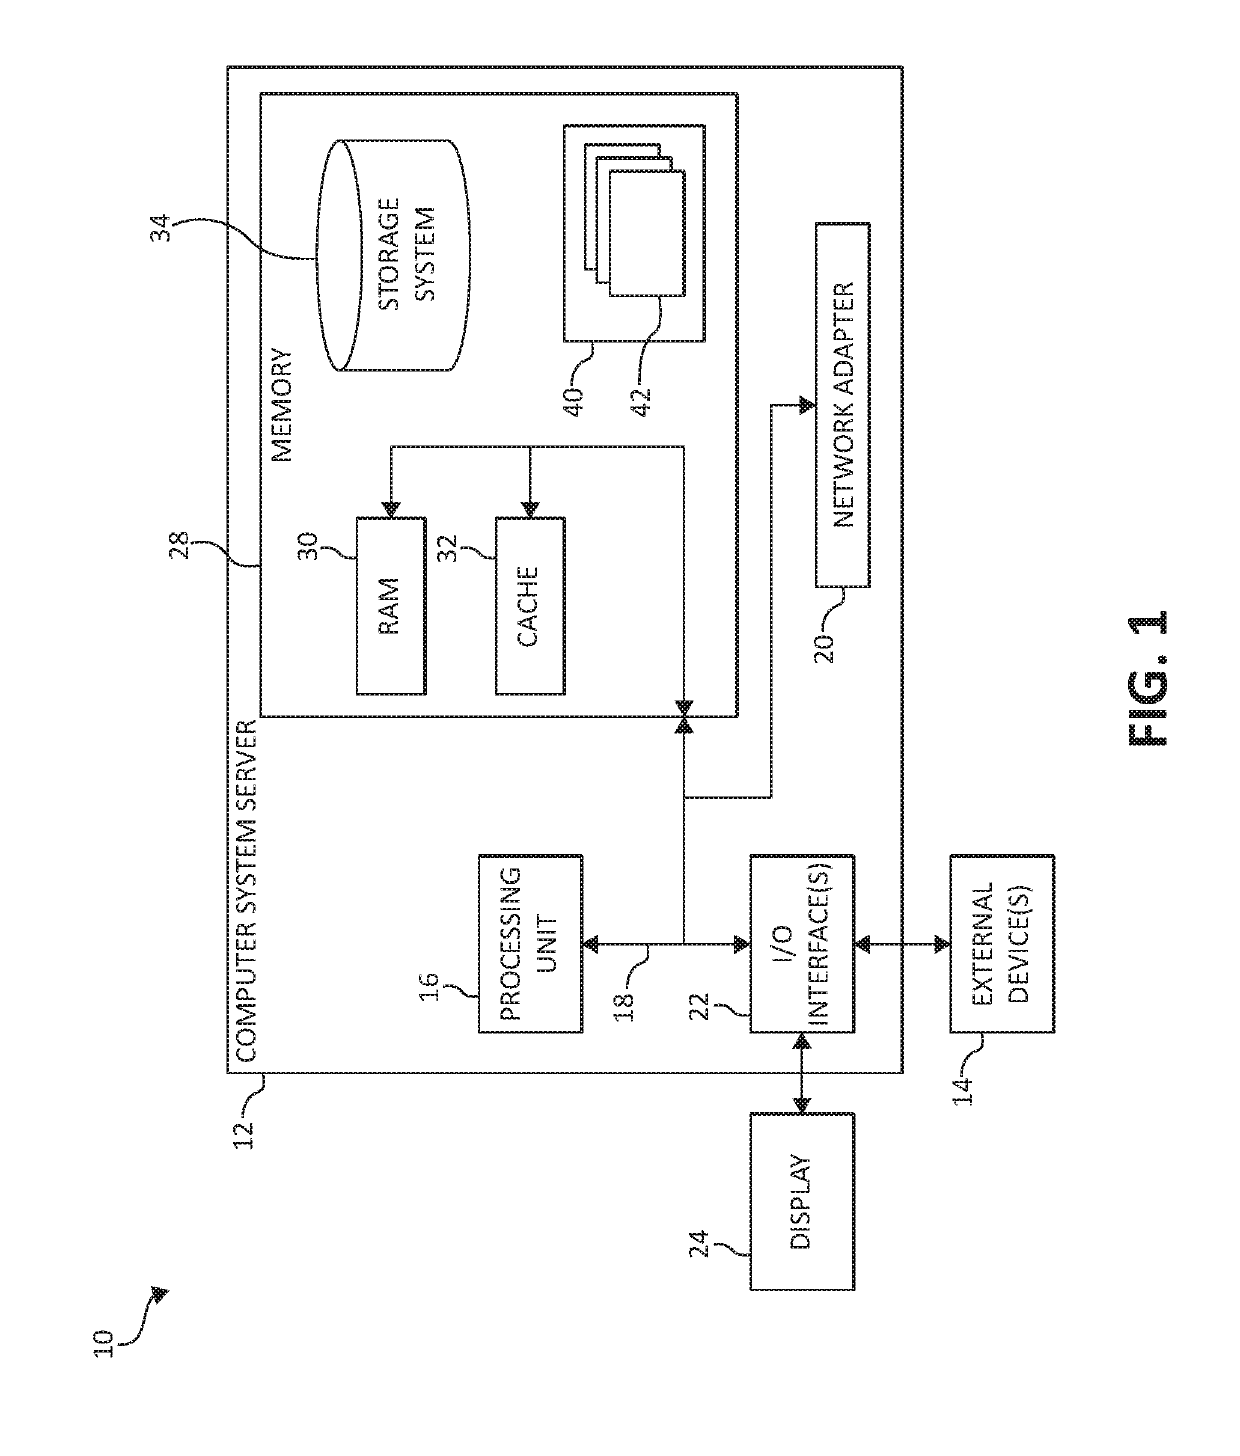 Automatic diagonal scaling of workloads in a distributed computing environment